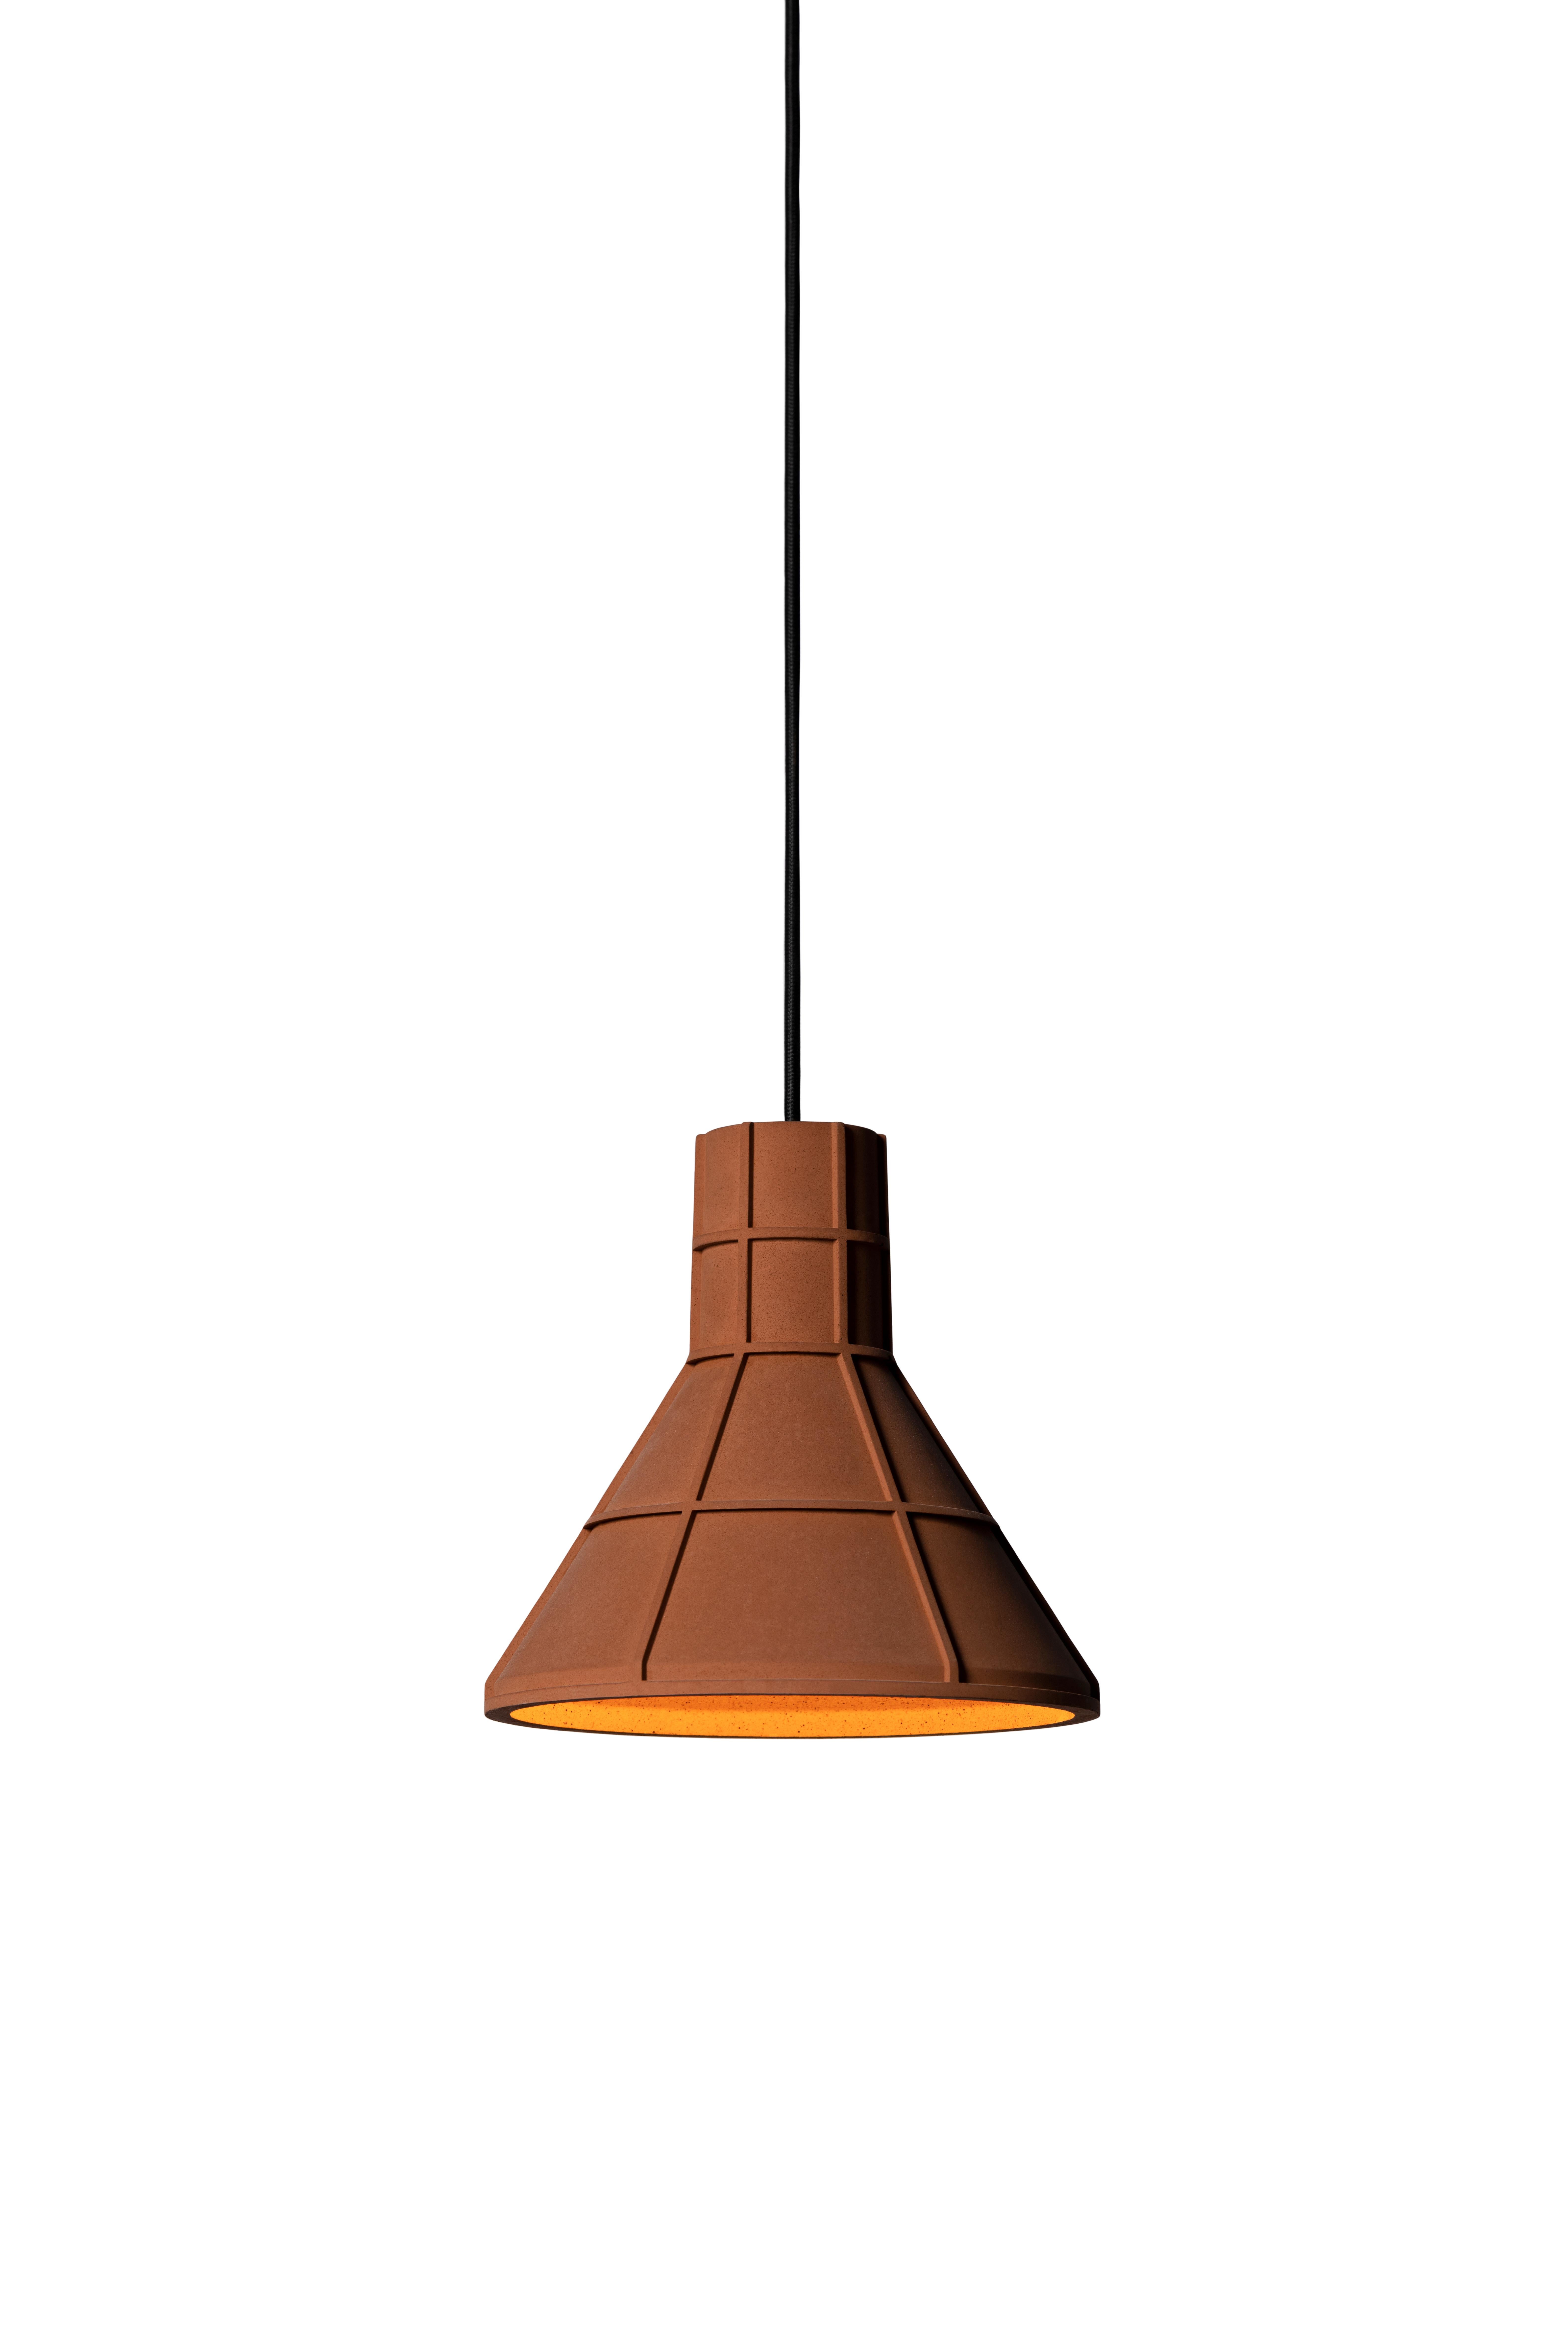 Pendant lamp 'U' by Nongzao x Bentu design.
Material: Terracotta 
Color: earthy brown

Measures: 21.1 cm high, 22.2 cm diameter
Wire: 3 meters (black)
Lamp type: AC 100-240V 50-60Hz  9W - Comptable with US electric system.

Variations:
- Color: